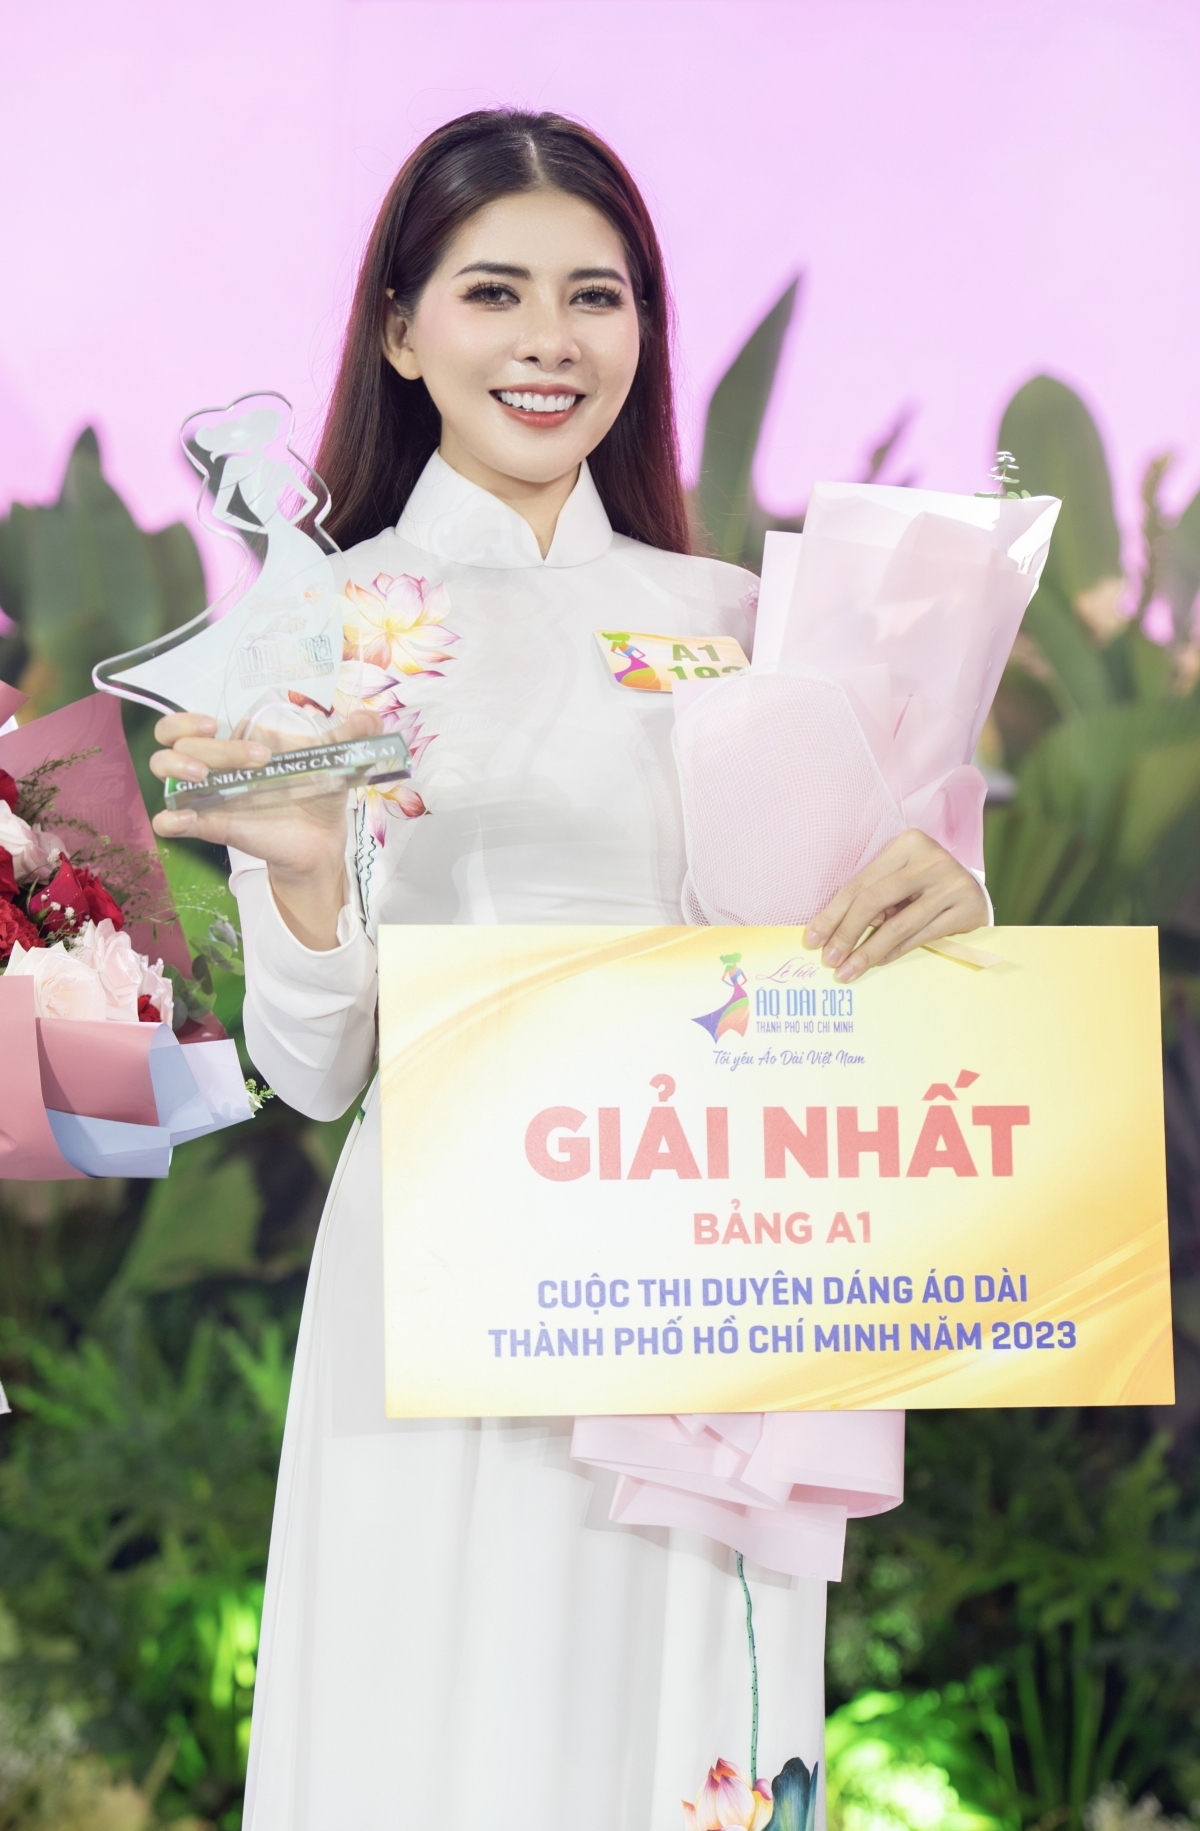 winners of charming ao dai contest in hcm city announced picture 1